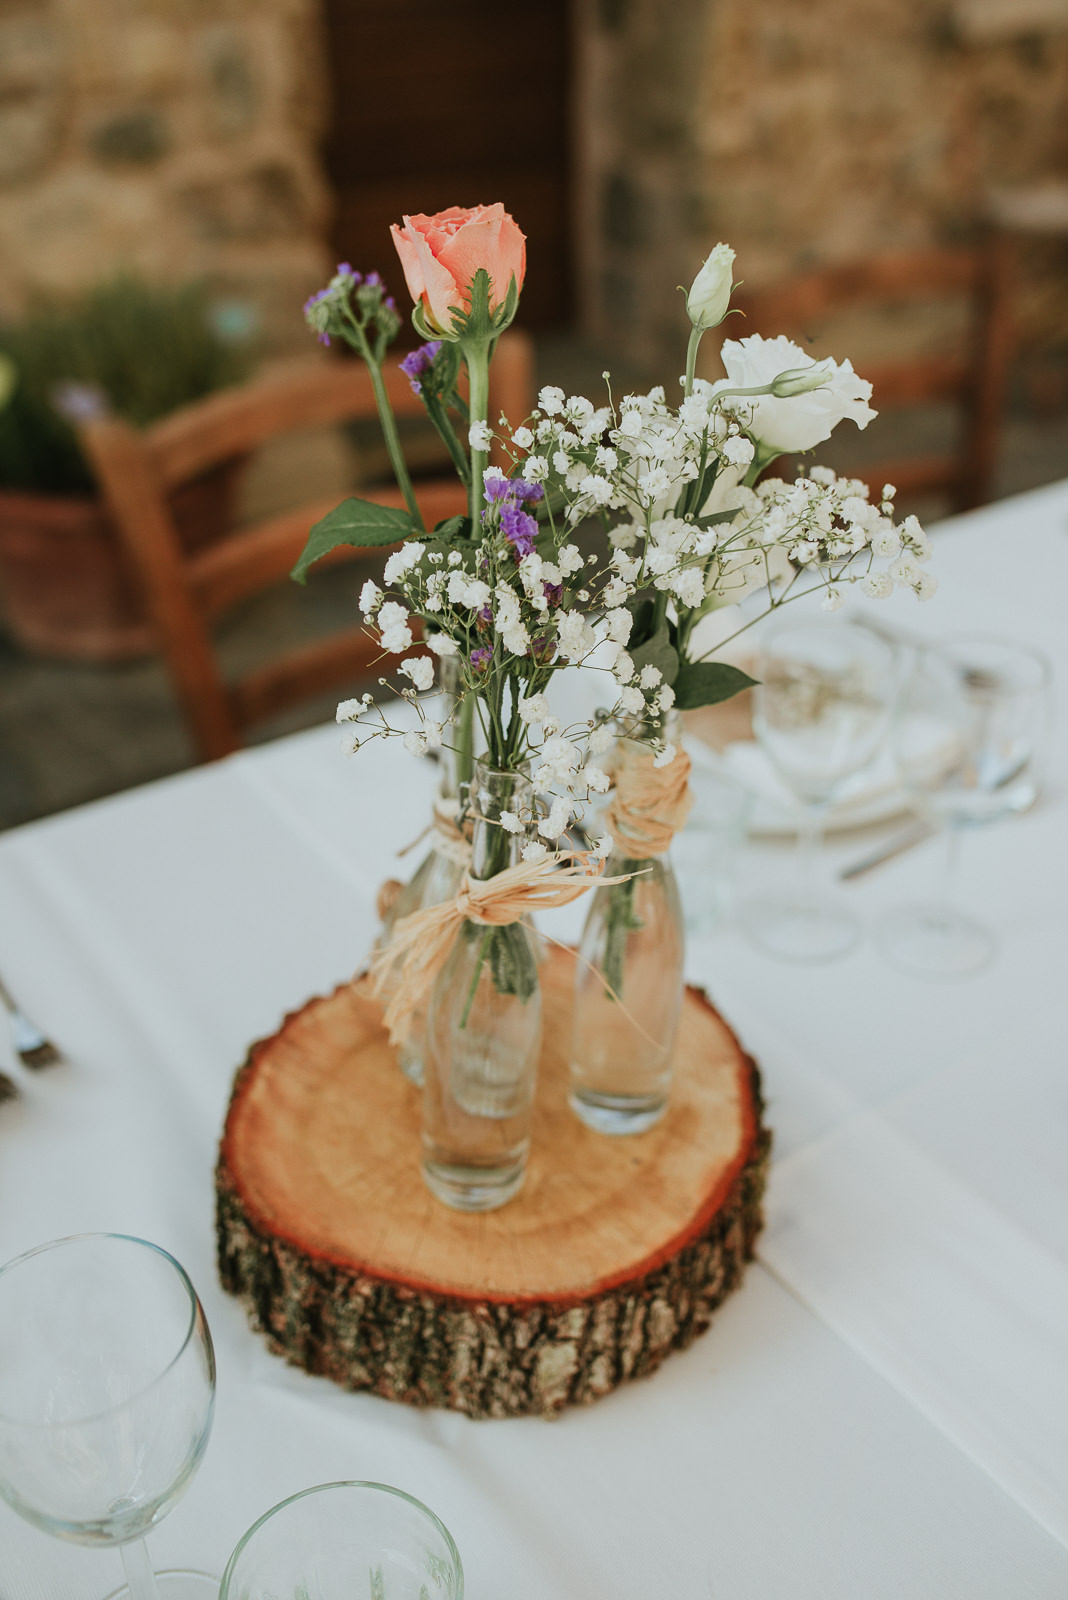 wooden centerpiece idea for wedding with white pink and lilac flower decoration